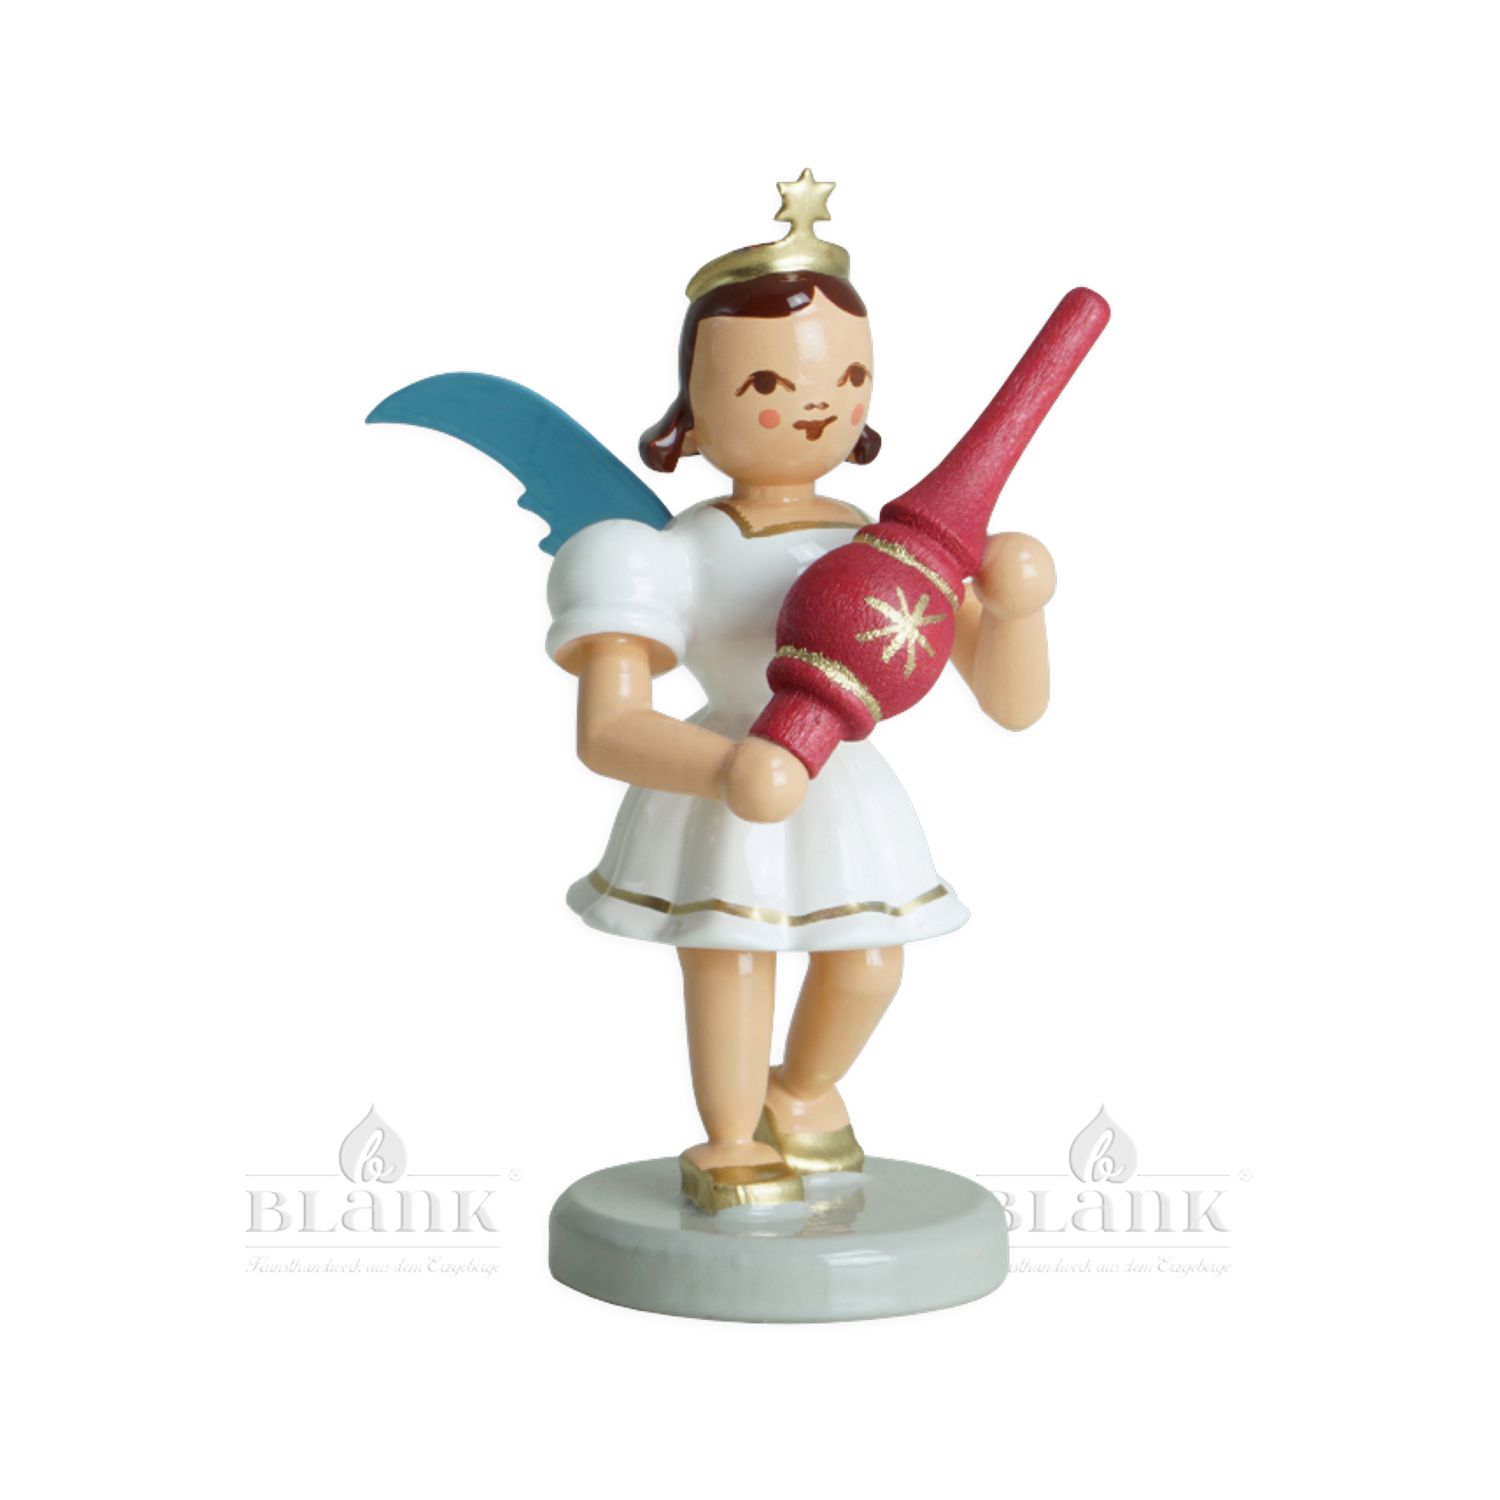 Blank Short skirt angel with Christmas tree topper, colored